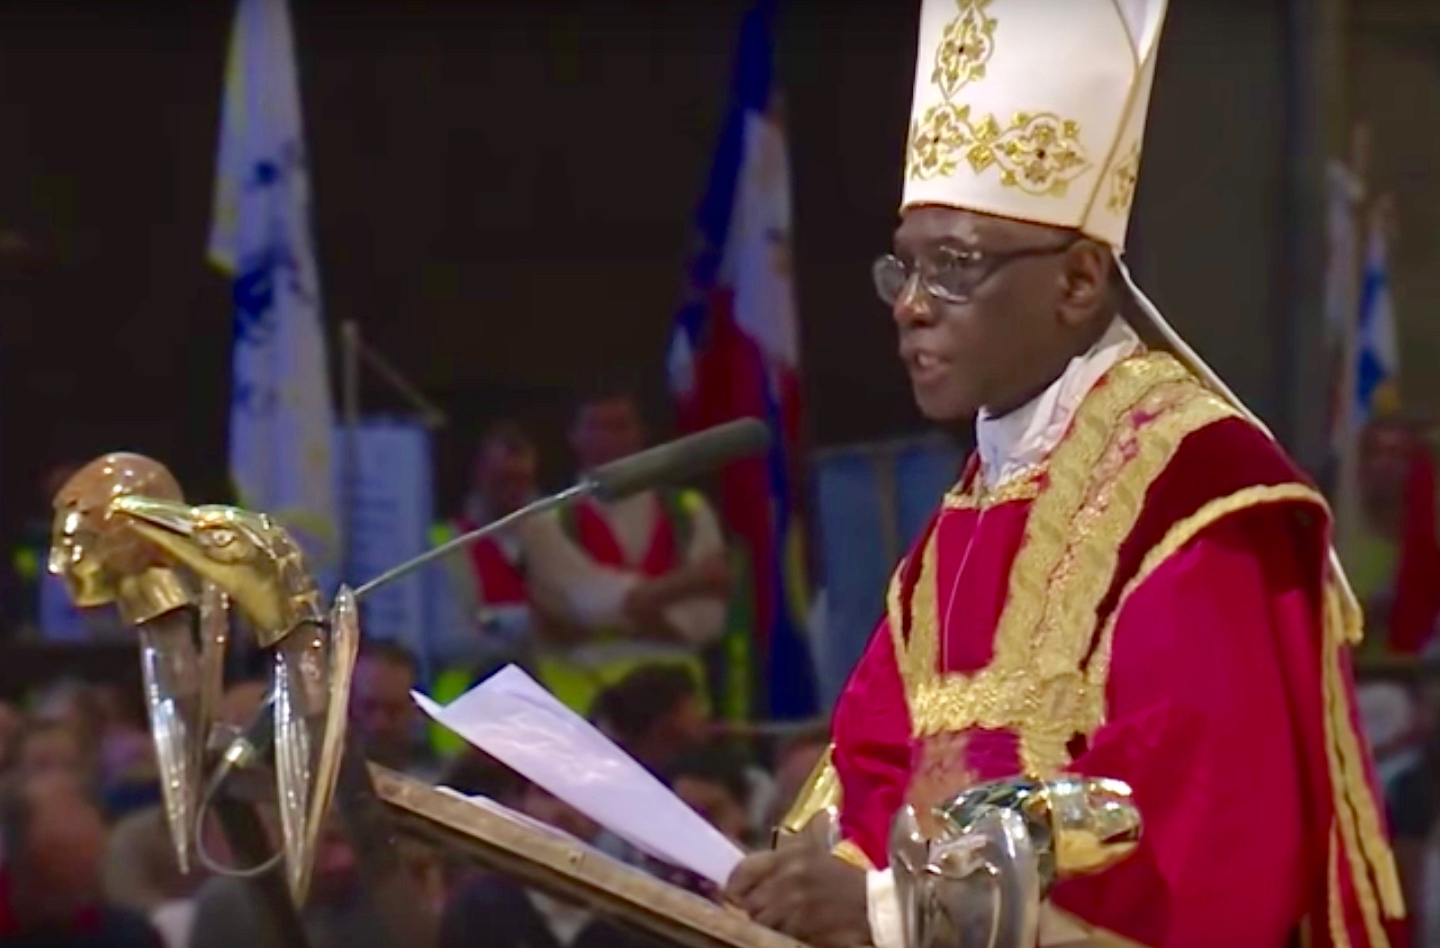 Cardinal Sarah warns that the West is like a ‘drunken boat’